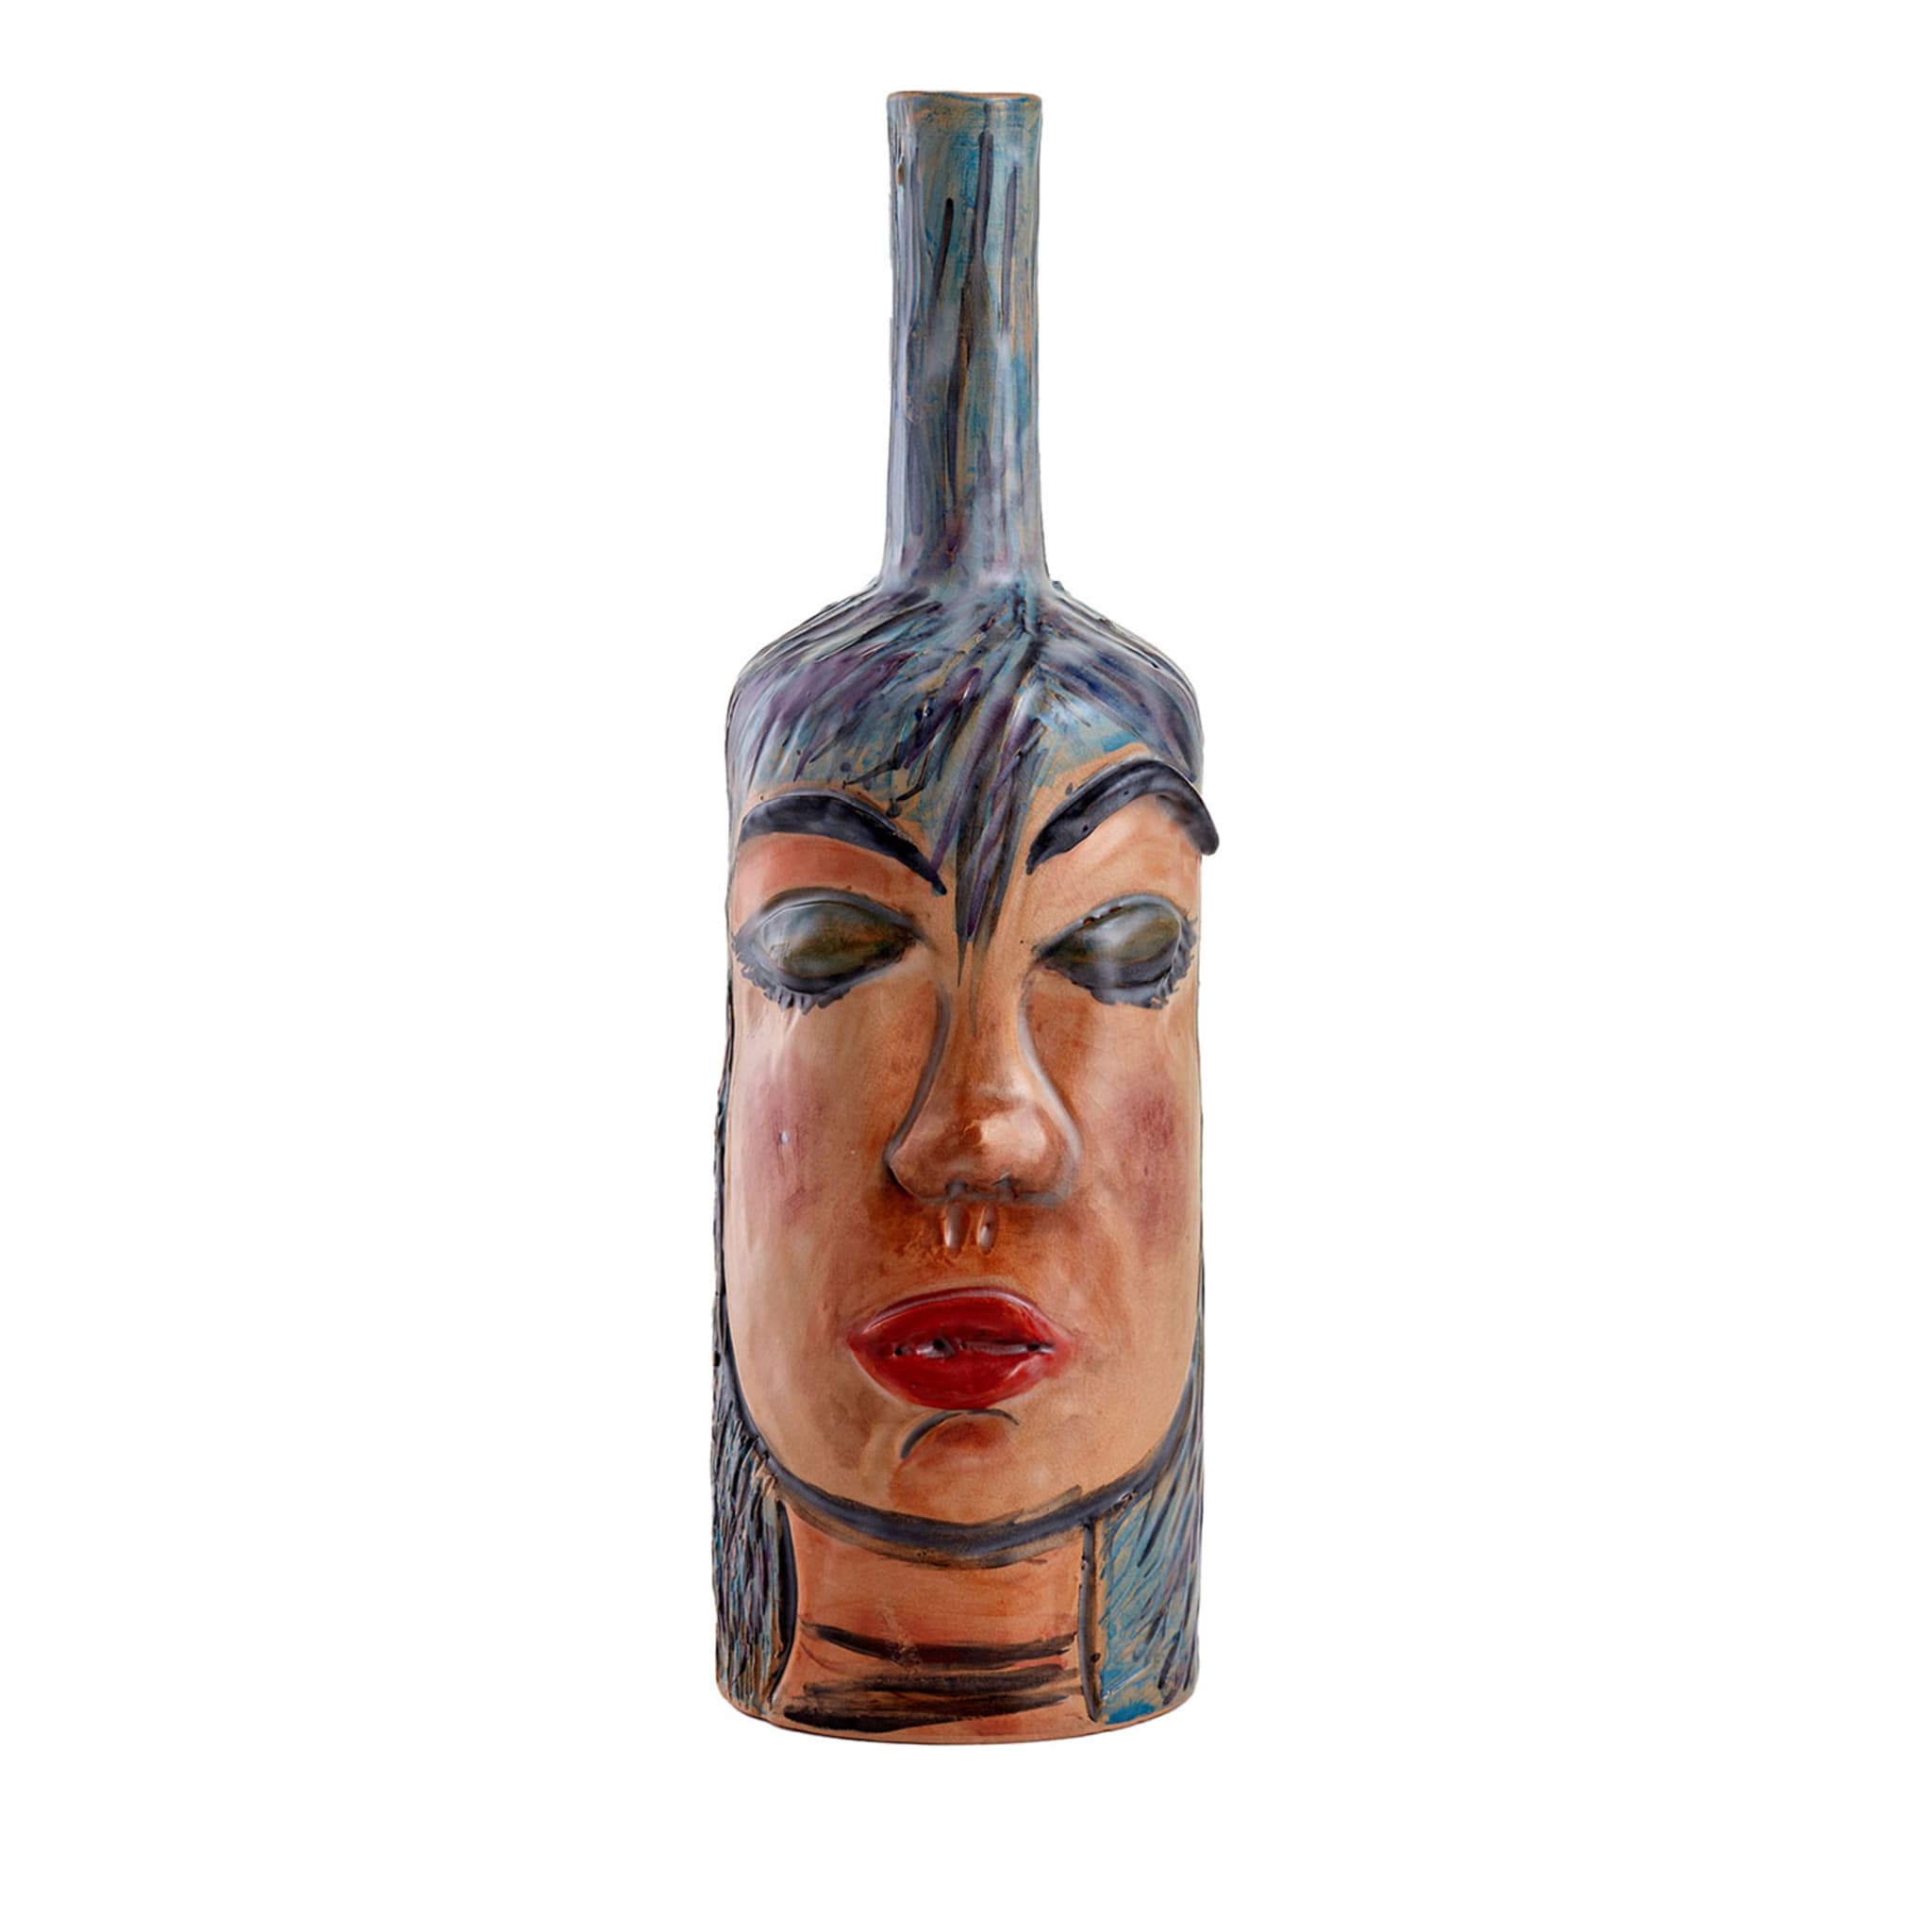 Anthropomorphic-Inspired H35 Polychrome Bottle/Sculpture #1 - Main view